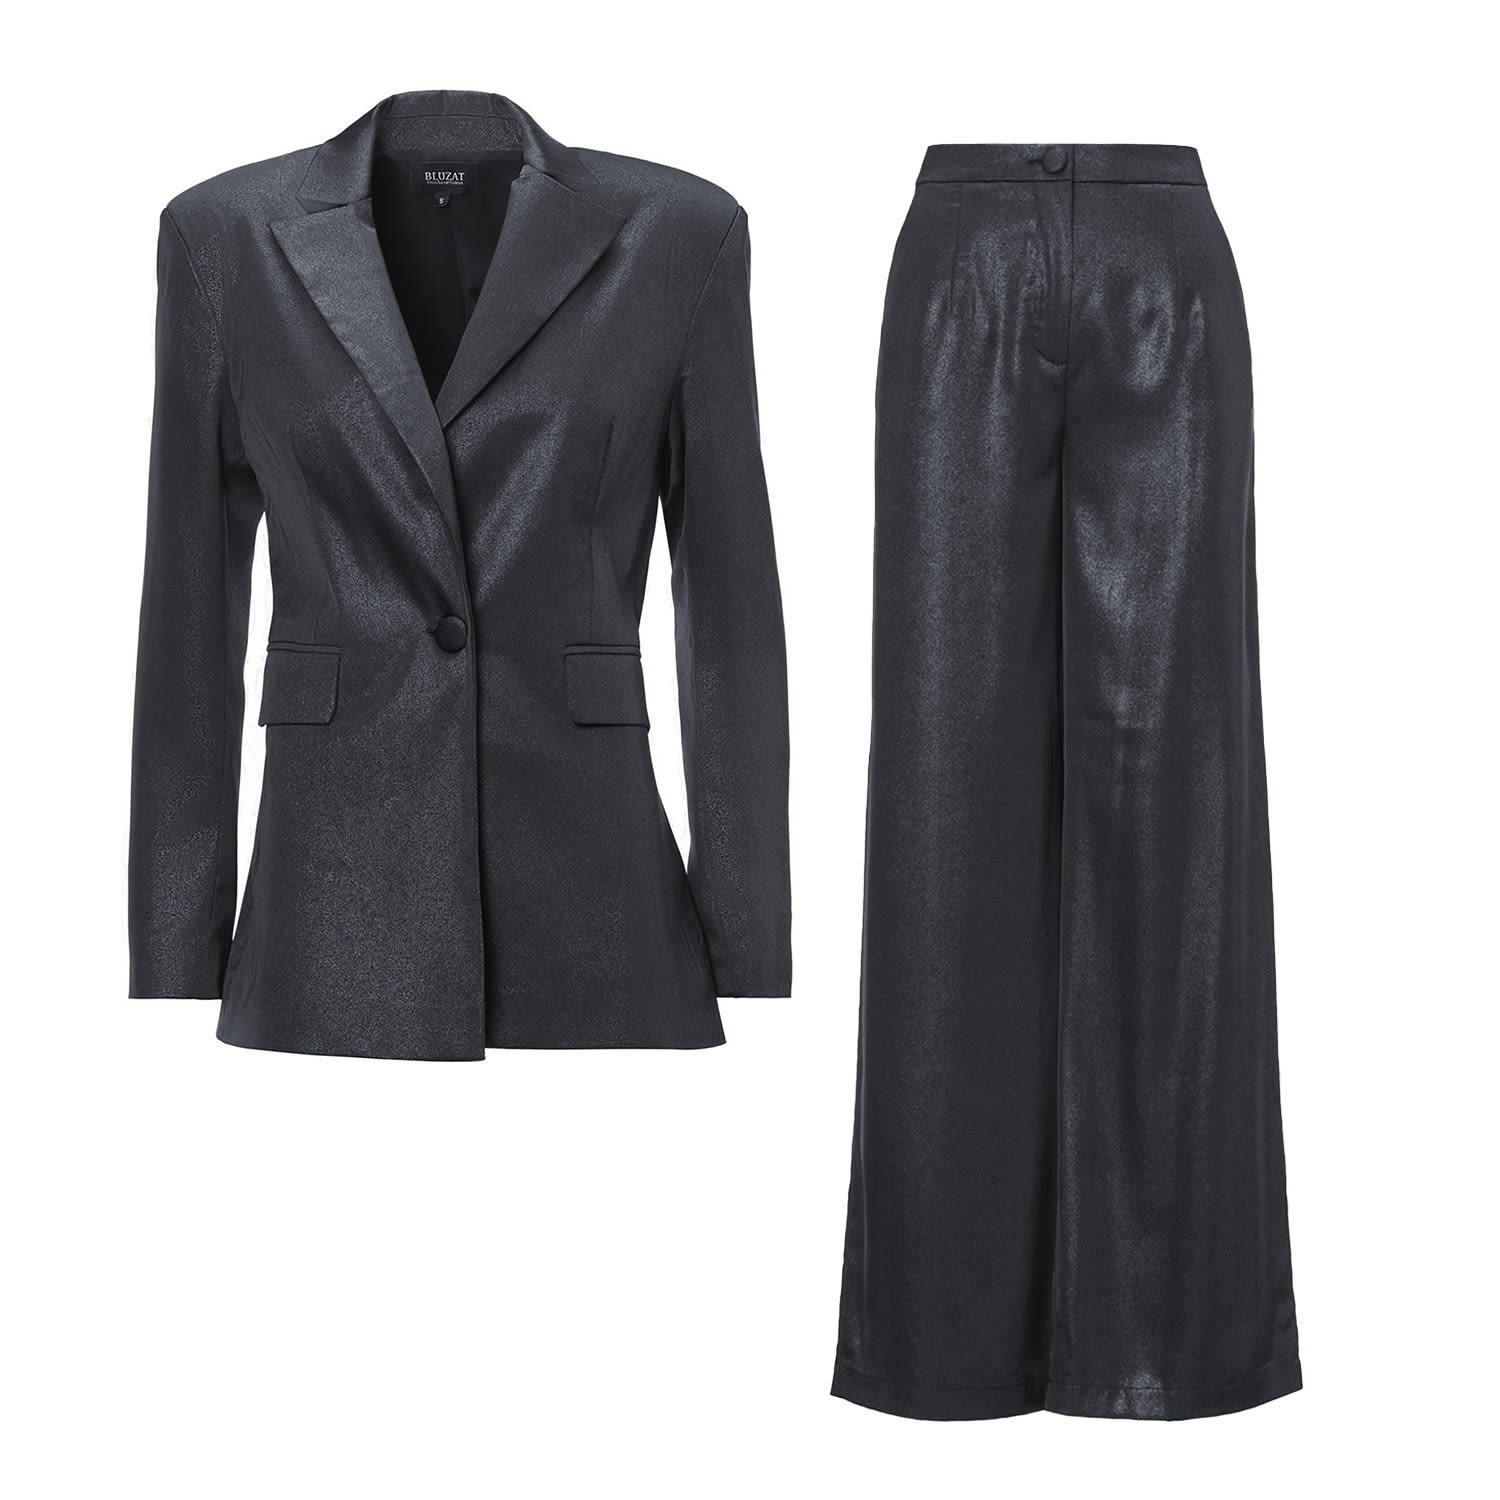 Black Shimmery Suit With Slim Fit Blazer And Wide Leg Trousers Extra Small Bluzat